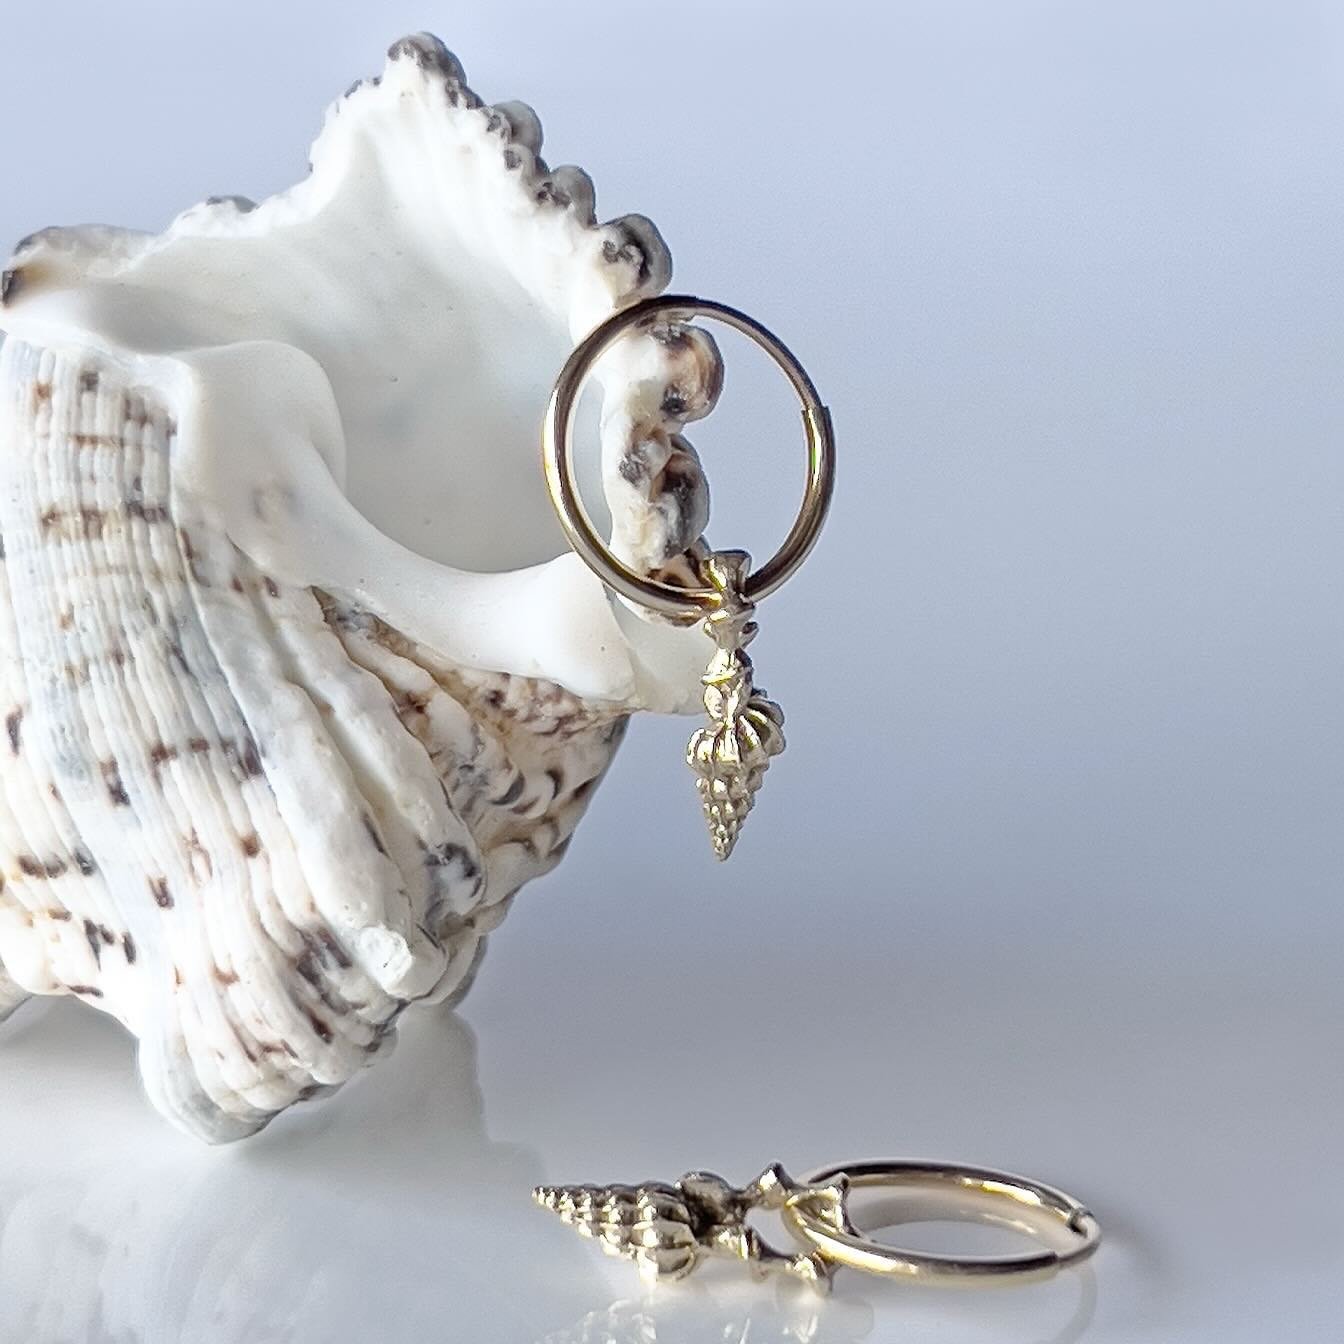 Sunny days in Berkeley remind us how lucky we are to be by the water. 🐚 These Spiral Charm on Hoop Earrings by Kirsten Muenster are playful but light for everyday wear. Available in 10k gold or sterling silver.

#innerlandscapes #shibumigallery #fou